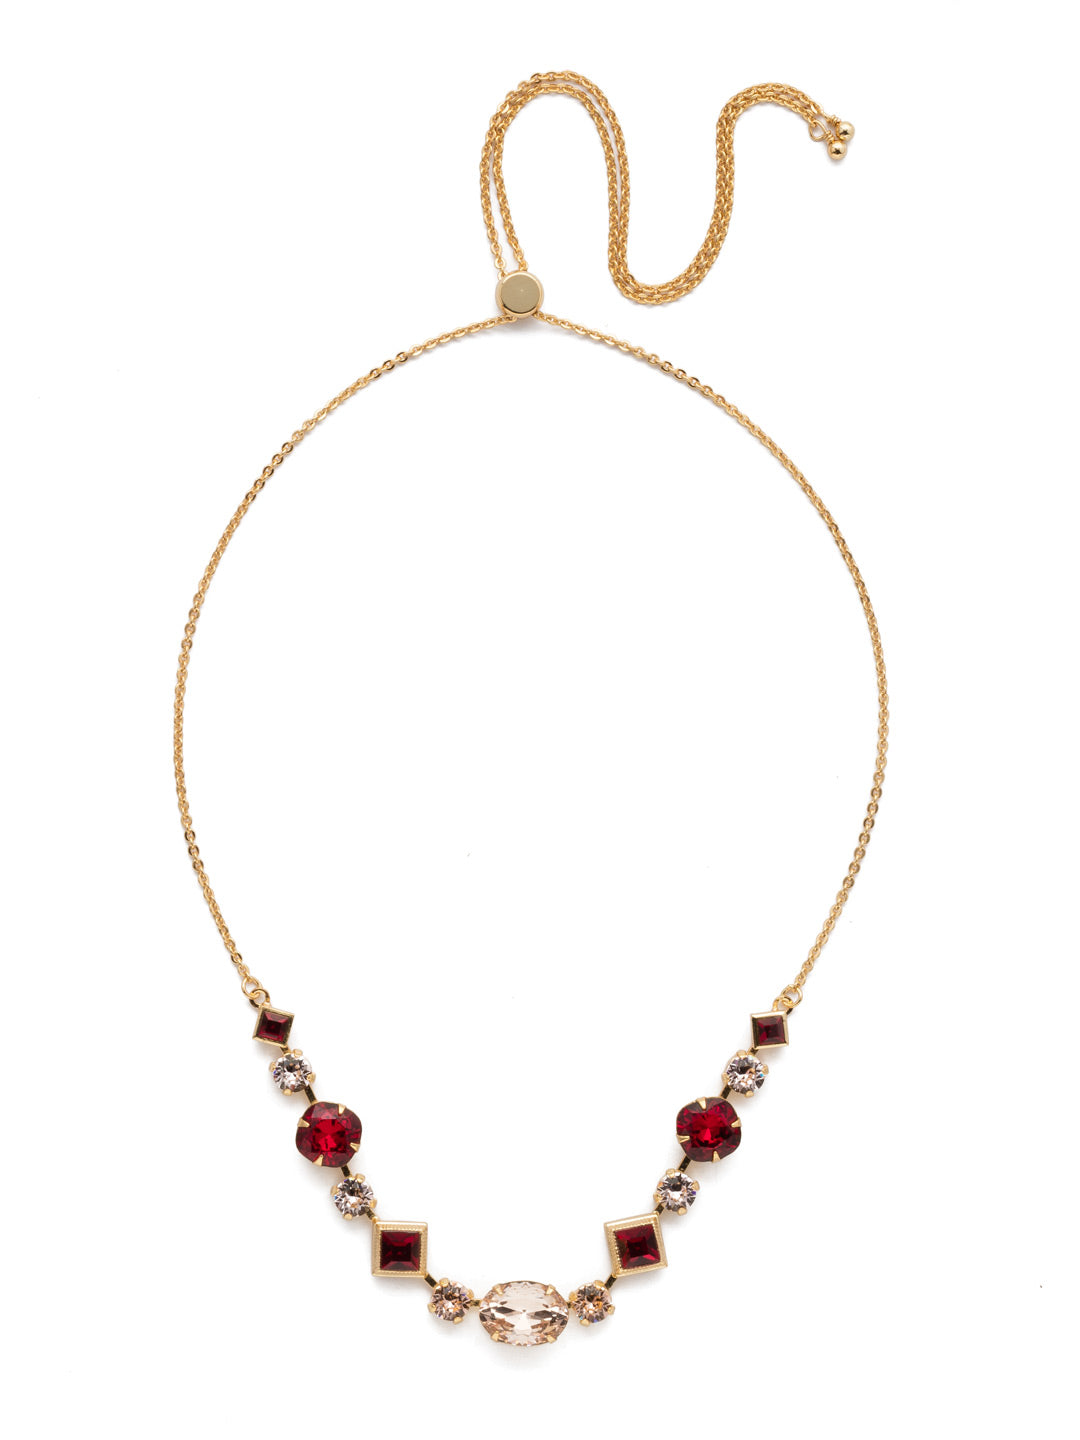 Cordelia Tennis Necklace - NEK29BGSRC - Can't decide on a favorite gem shape? Good news! We've got you covered with this classic necklace perfect for a romantic night out, or for making an ordinary outfit extra special. From Sorrelli's Scarlet Champagne  collection in our Bright Gold-tone finish.